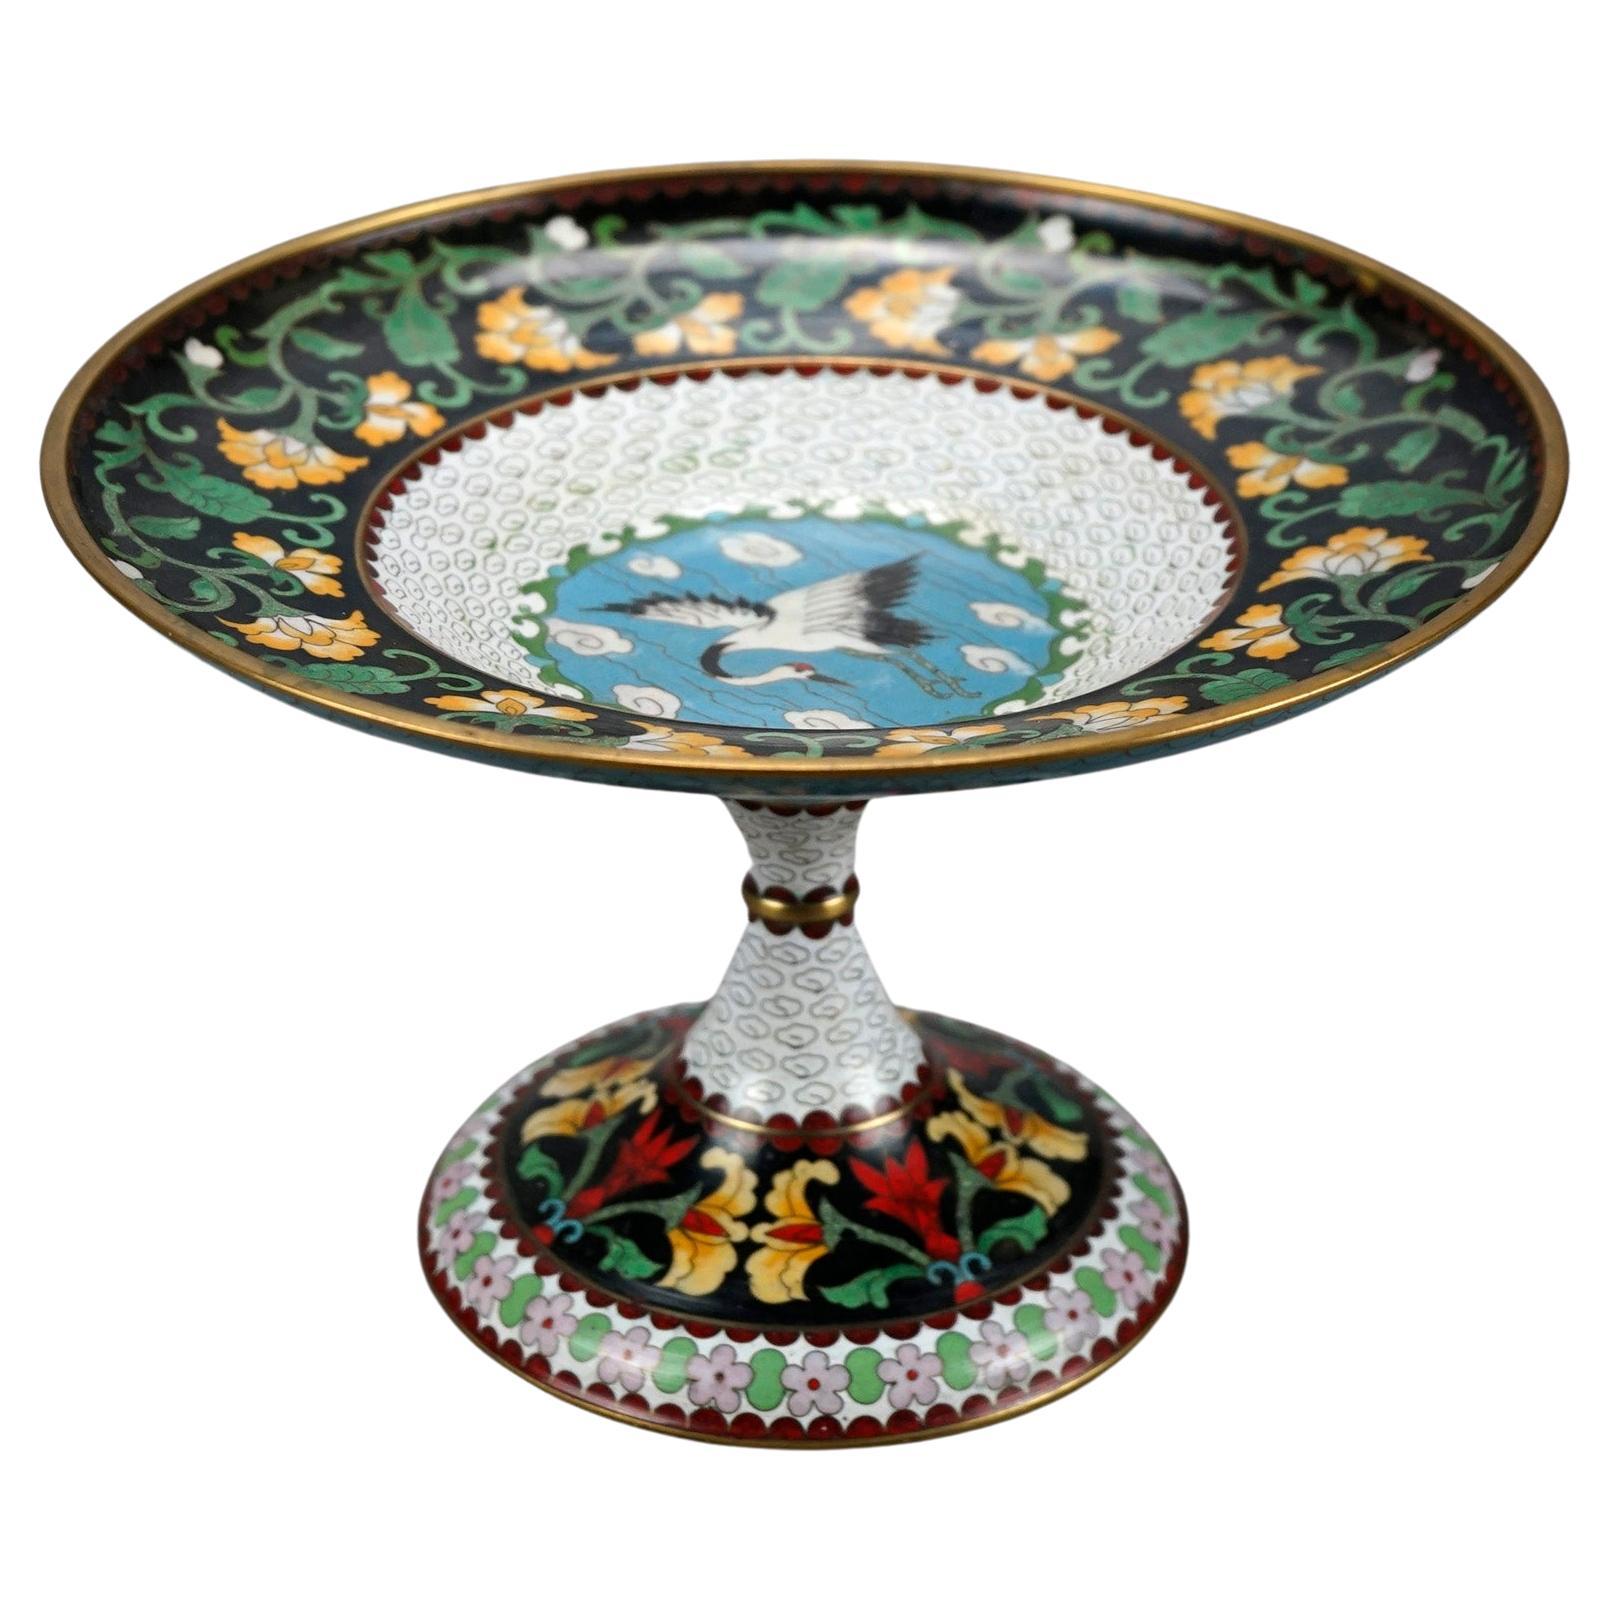 Antique Chinese Cloisonné Enamel Decorated Swan Compote Circa 1930 For Sale